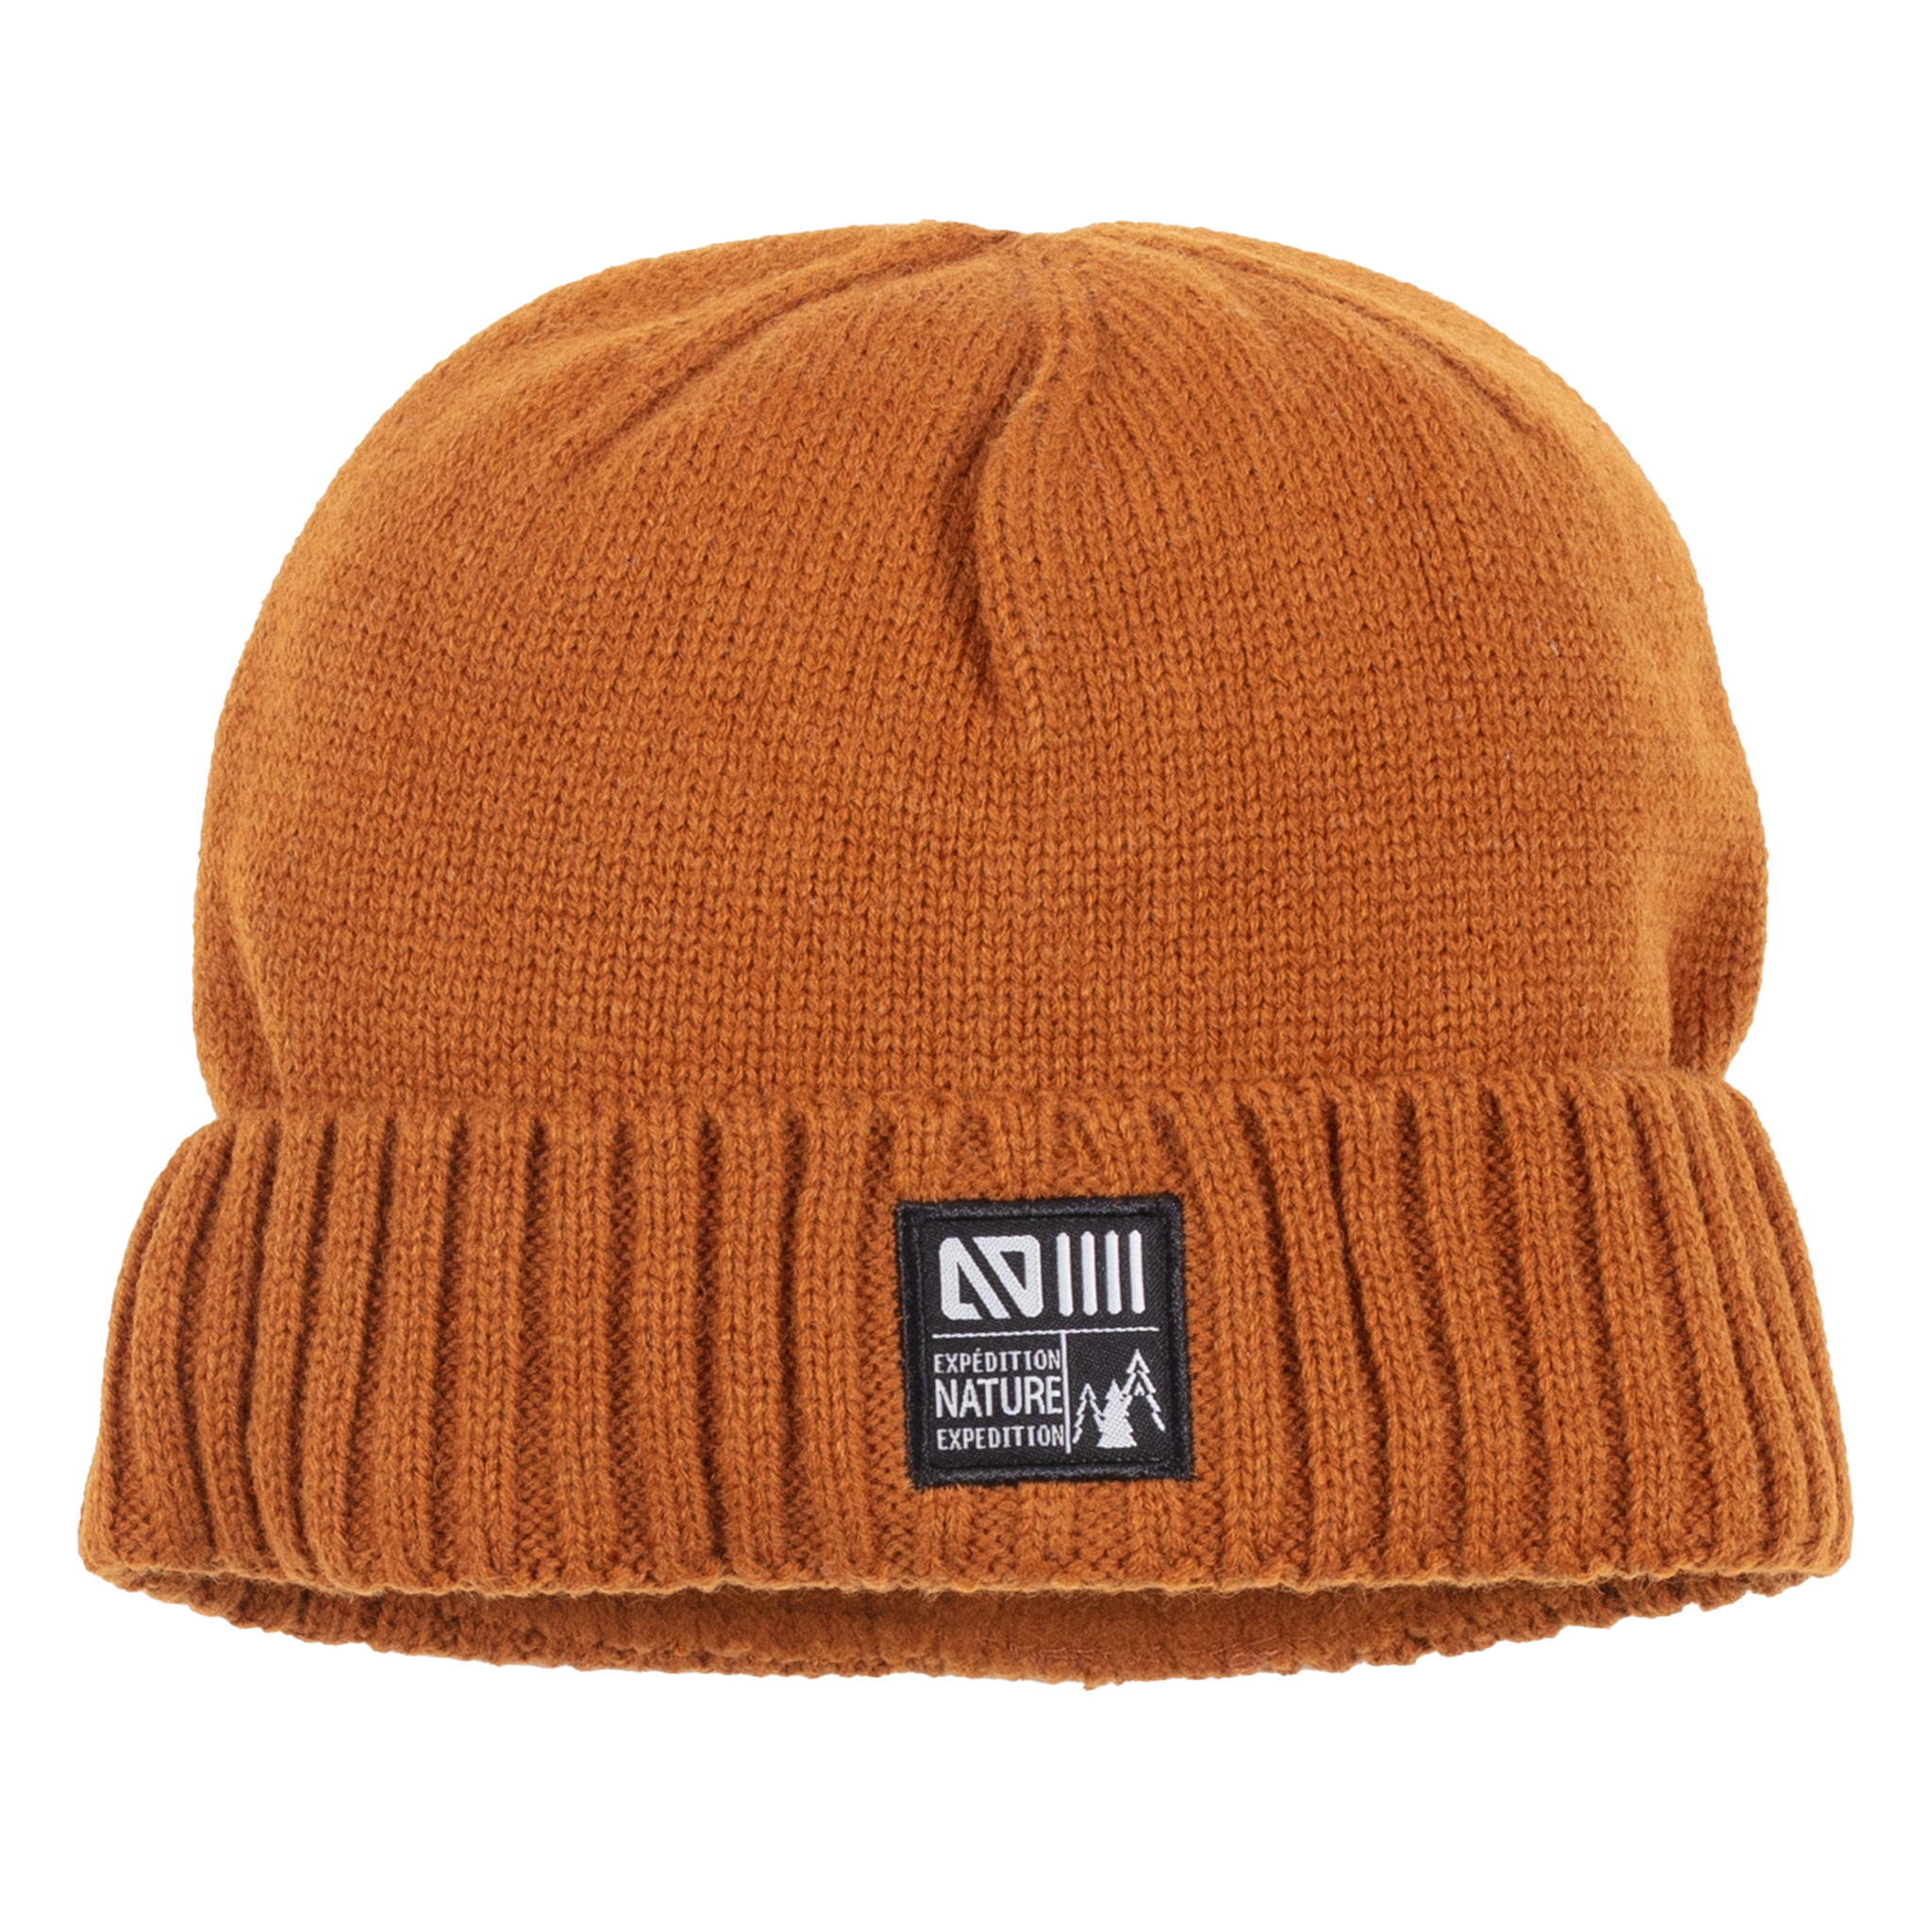 Tuque Hiver - Nathan-3